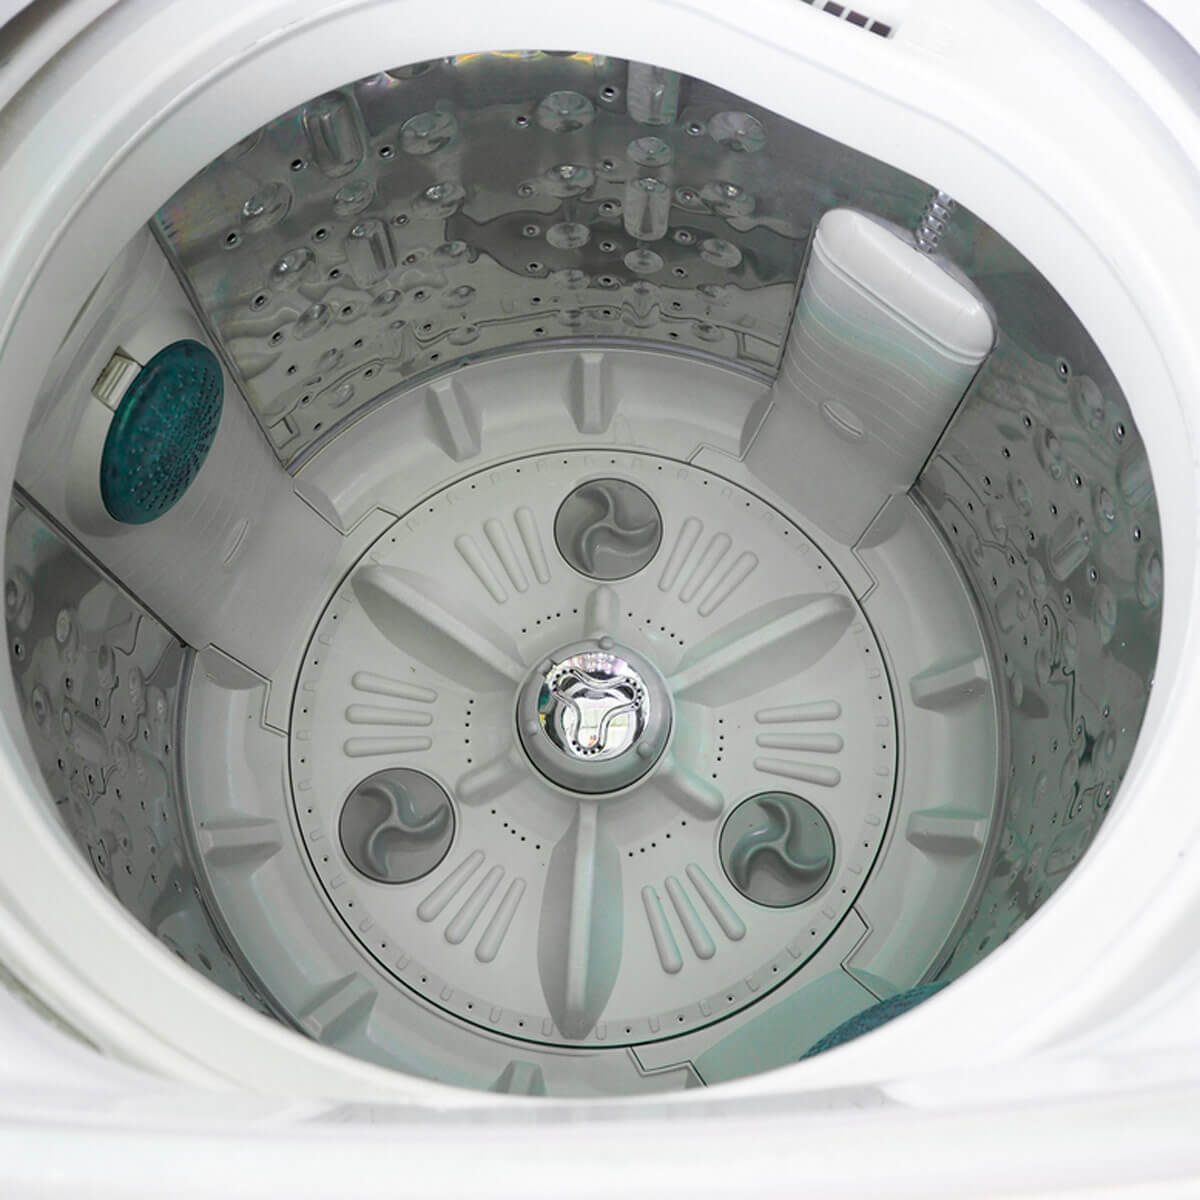 Cleaning Top Loading Washer